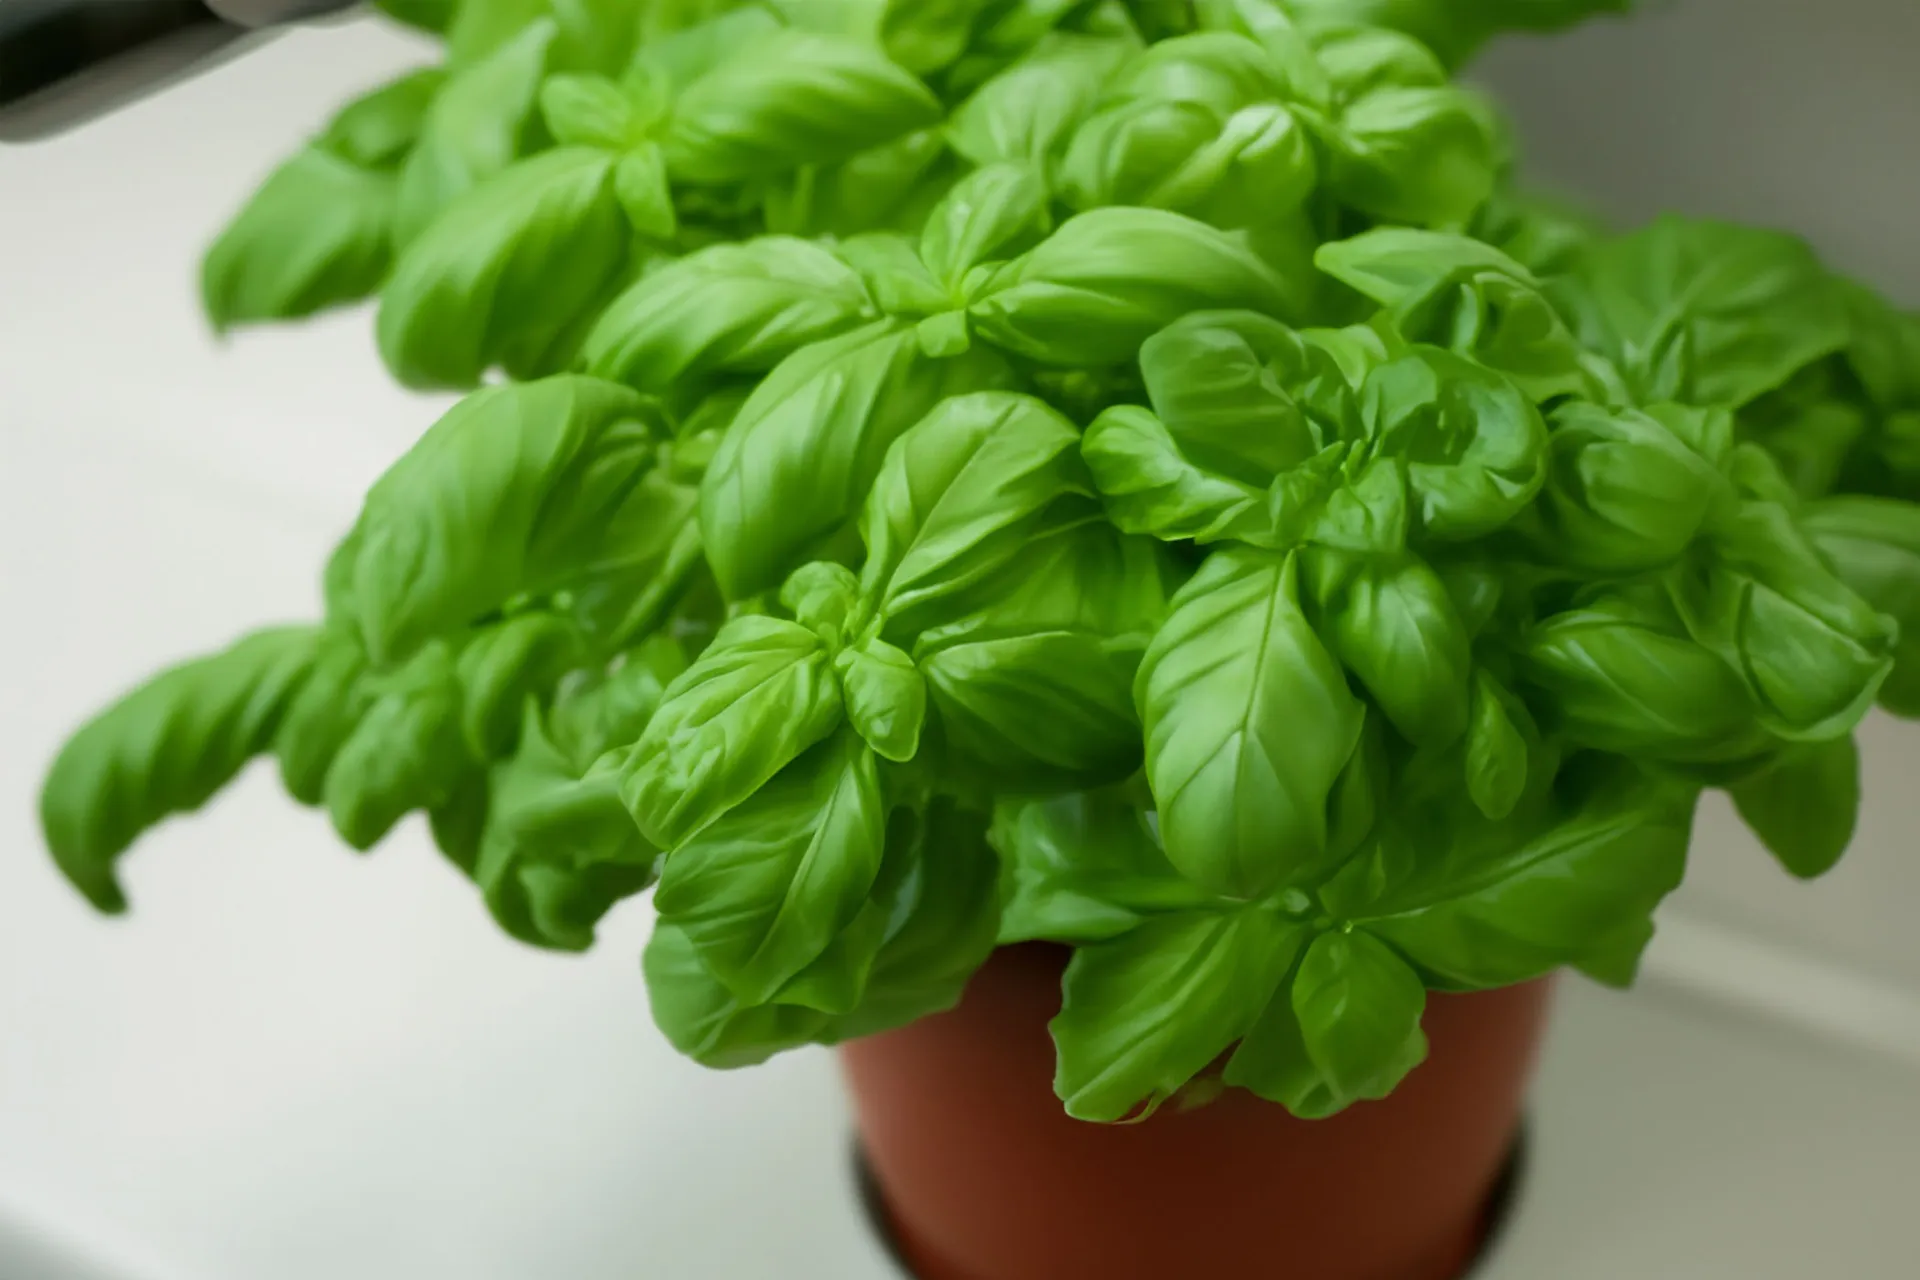 Basil plant growing in a terracotta pot sitting on a white counter.